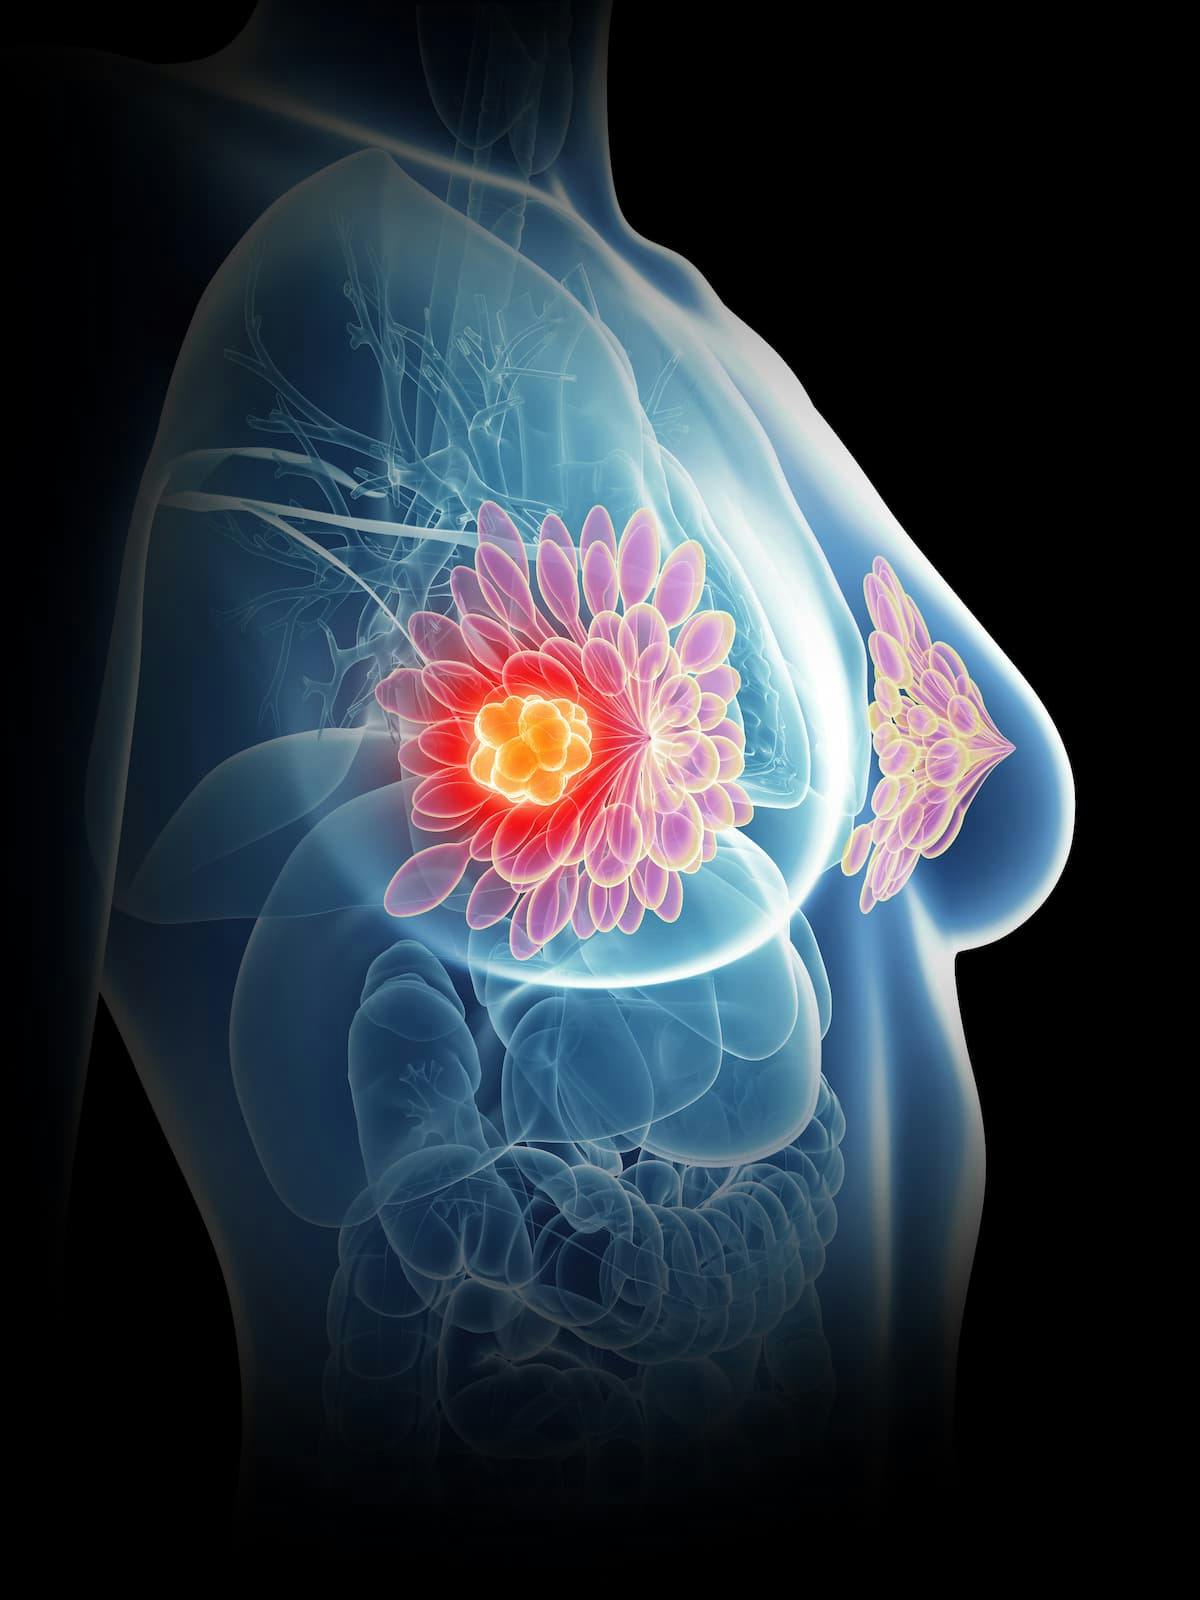 "This approval marks an important day for the breast cancer community in China as patients with HER2-positive metastatic breast cancer continue to need additional treatment options," according to an expert from Institute Cancer Hospital of the Chinese Academy of Medical Sciences.